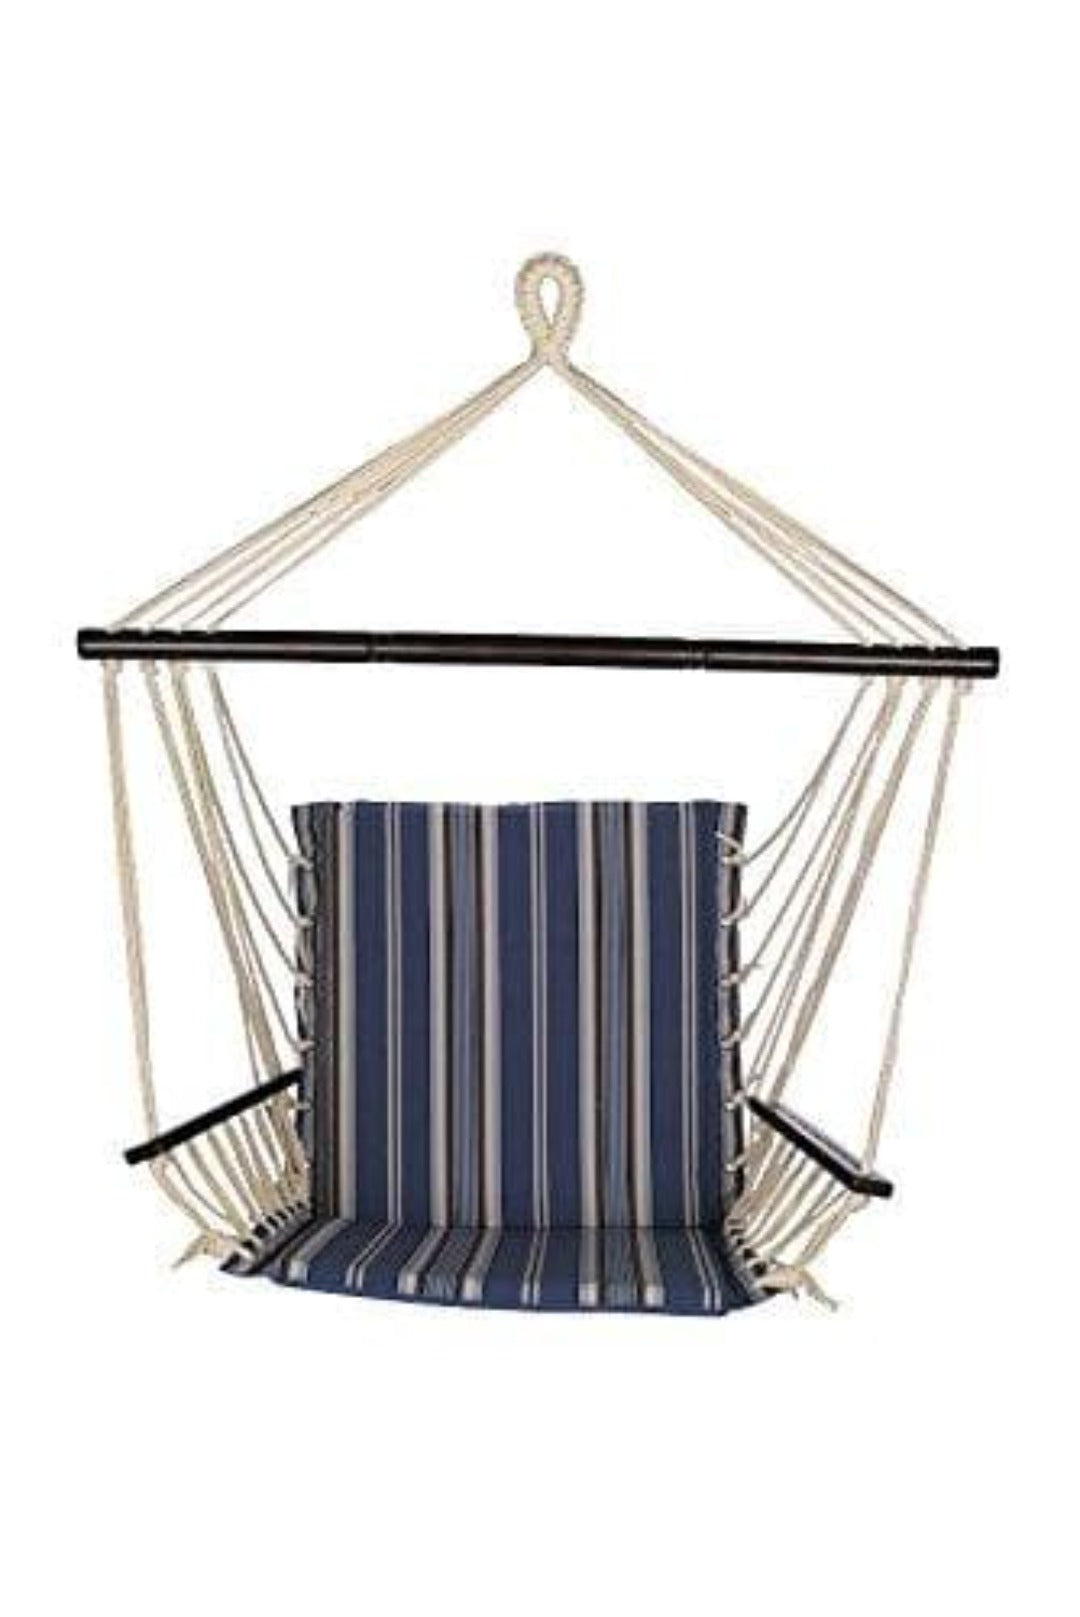 Bliss Metro Series Hammock Hanging Chair with Armrests - Senior.com Hanging Chairs